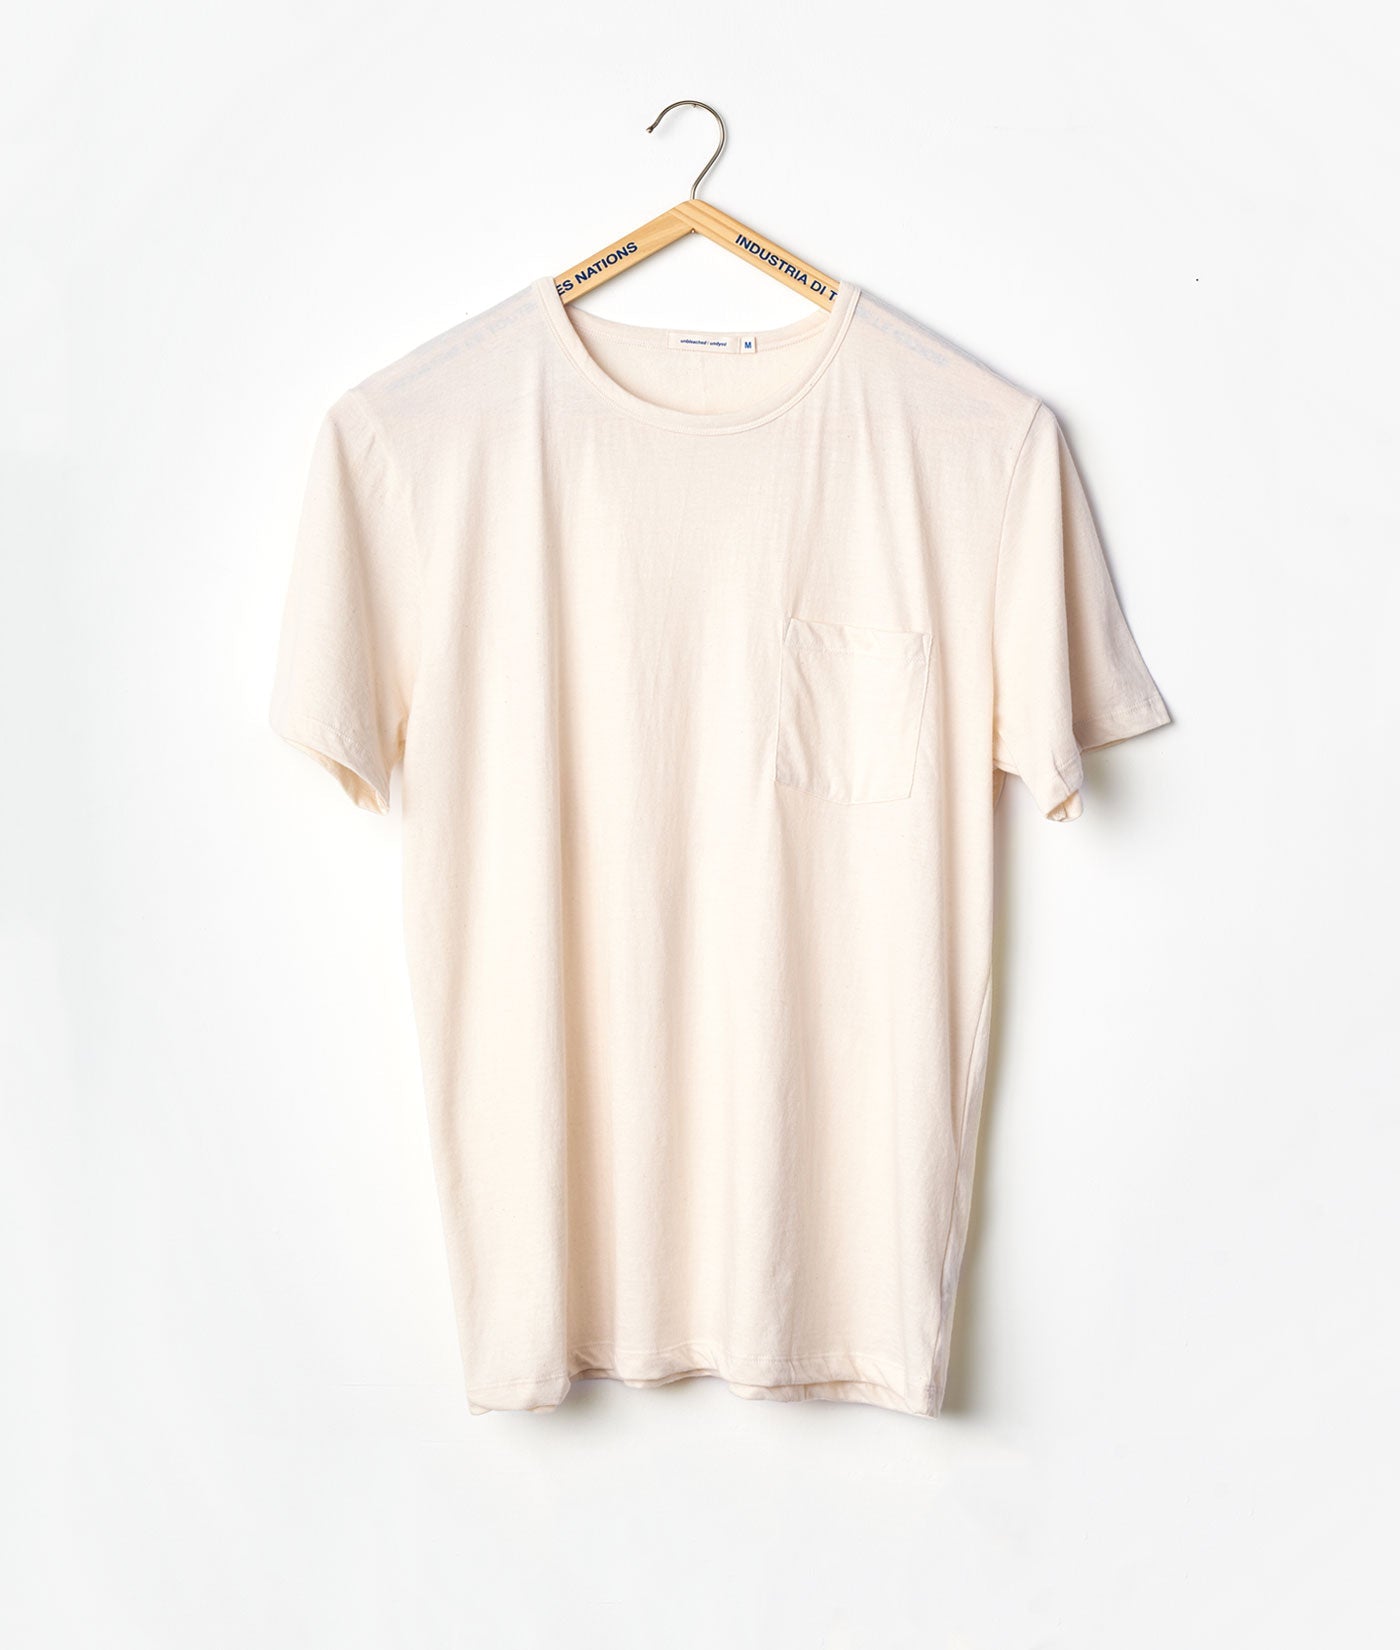 Industry of All Nations Clean Pocket T-Shirt, Undyed